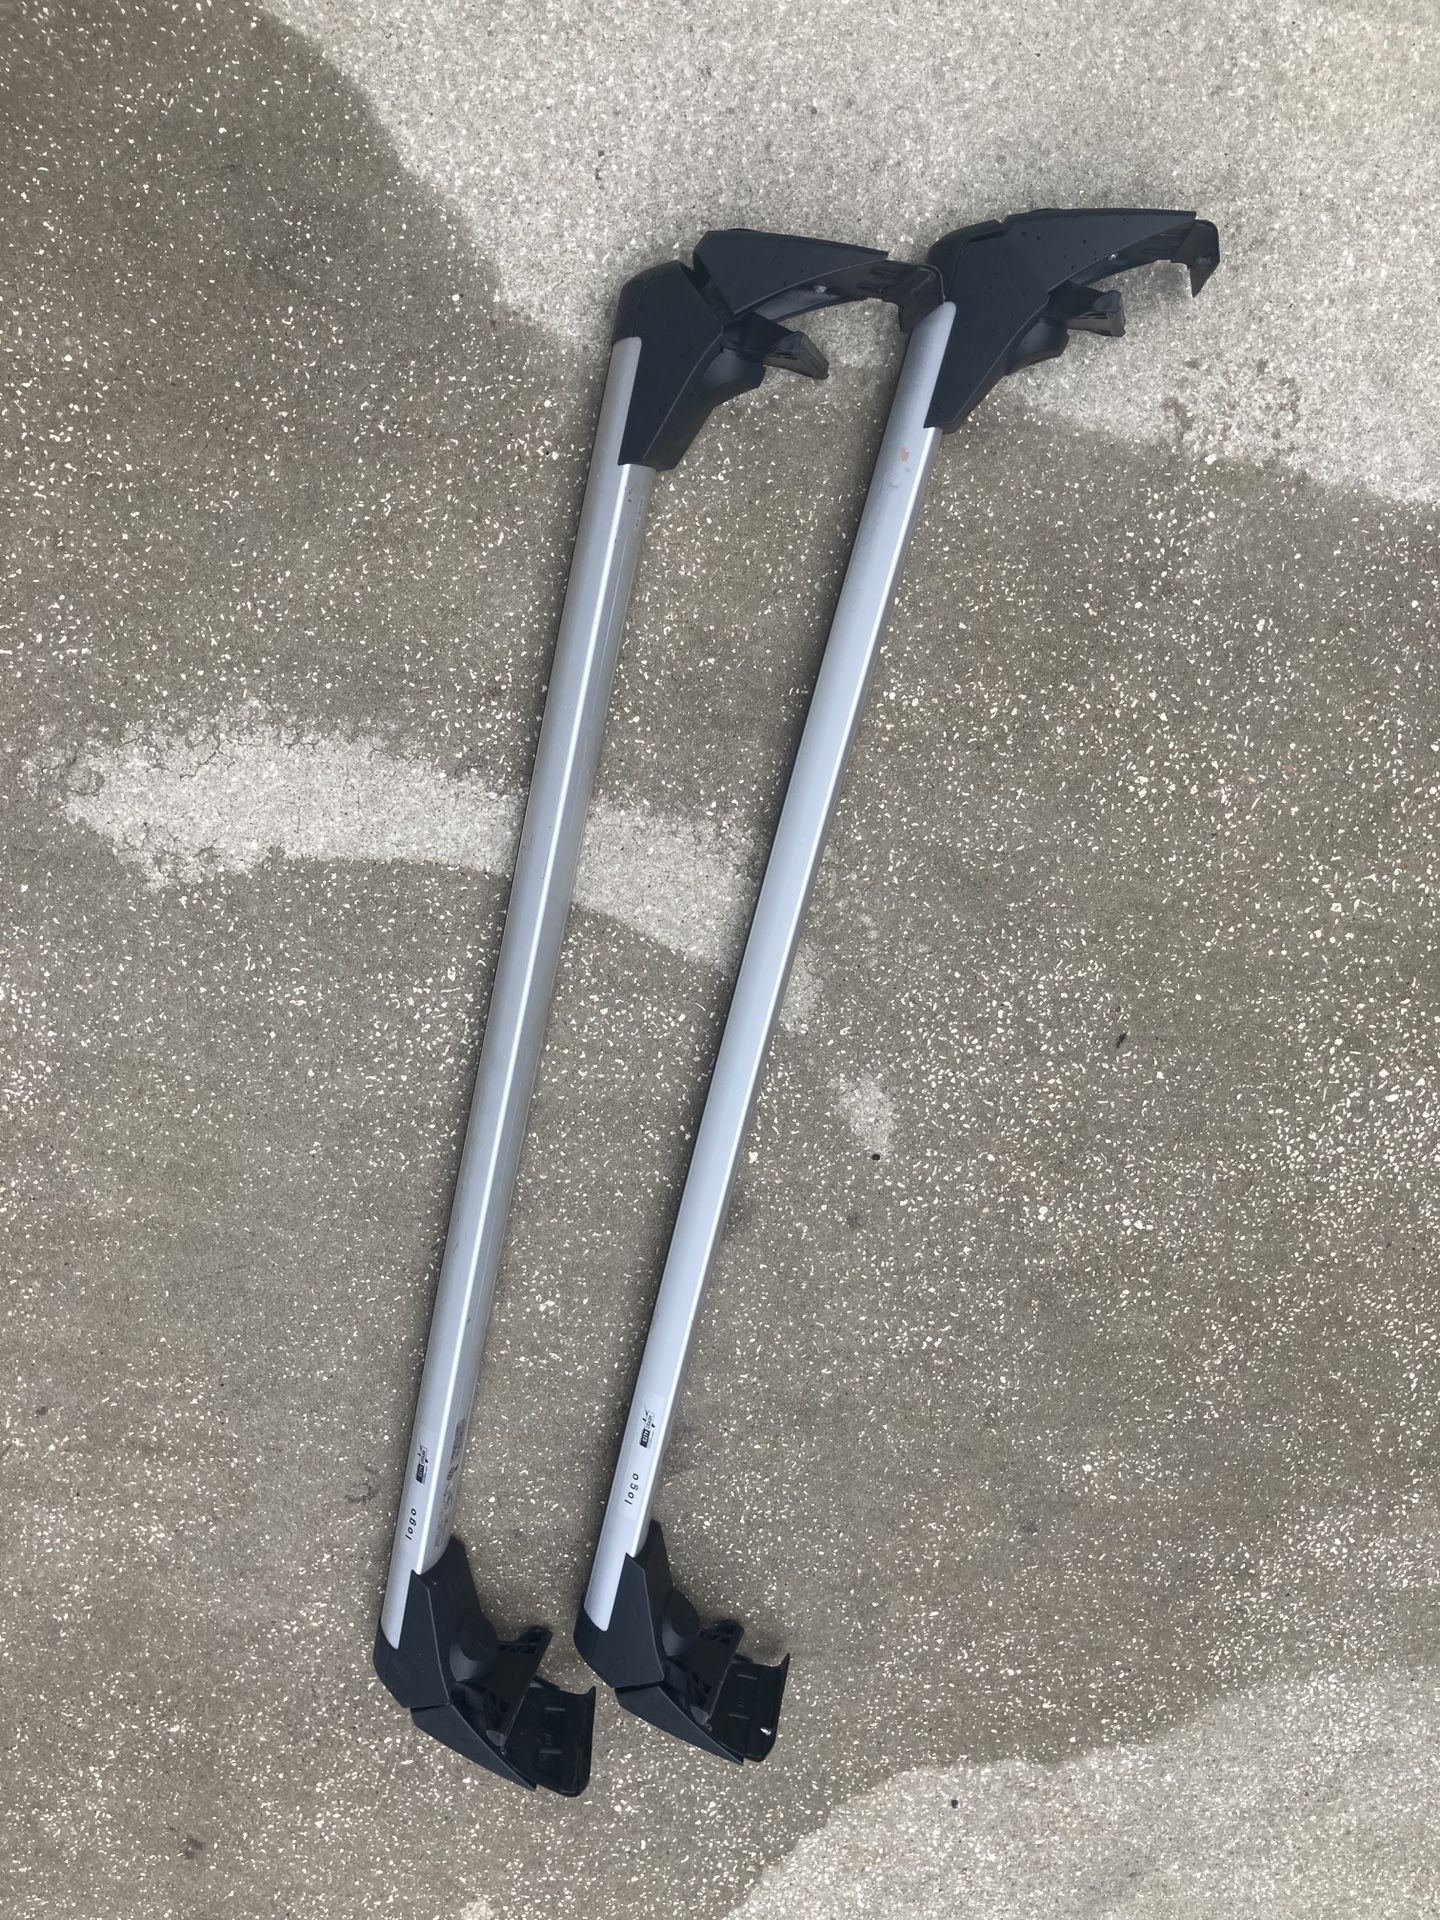 VW Jetta Roof Racks with Wrench